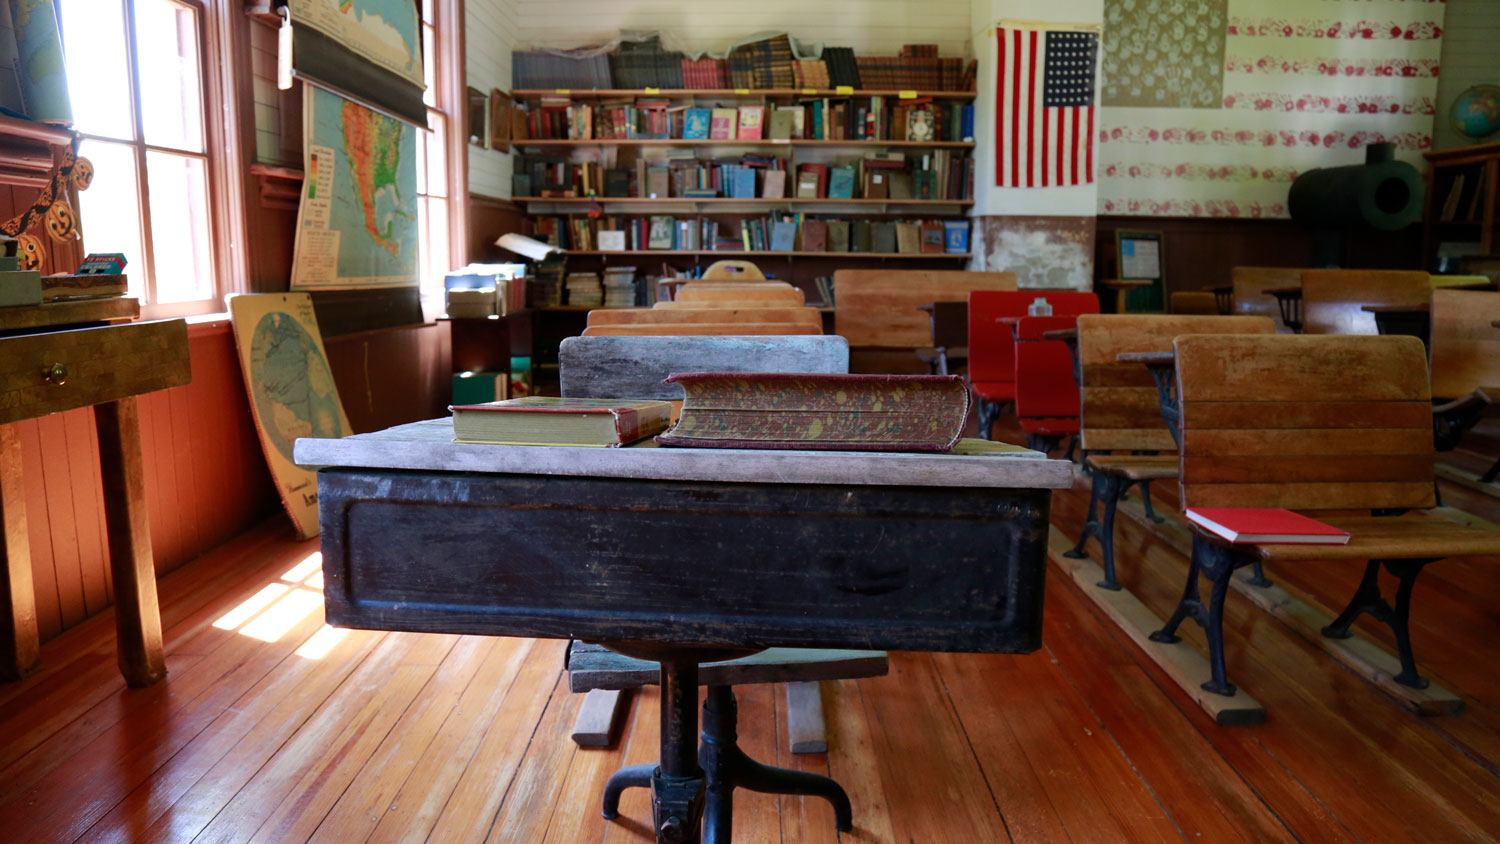 A row of antique desks in the one room schoolhouse classroom in Pioneer Village